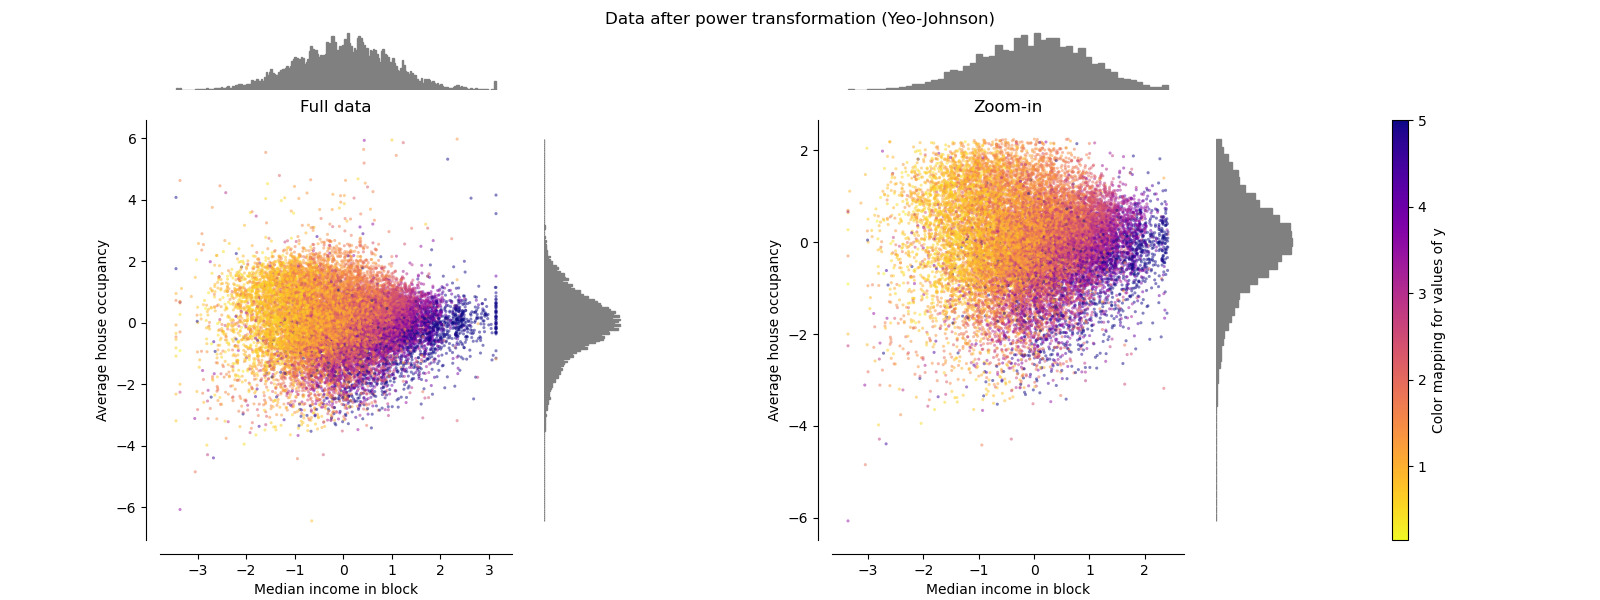 Data after power transformation (Yeo-Johnson), Full data, Zoom-in